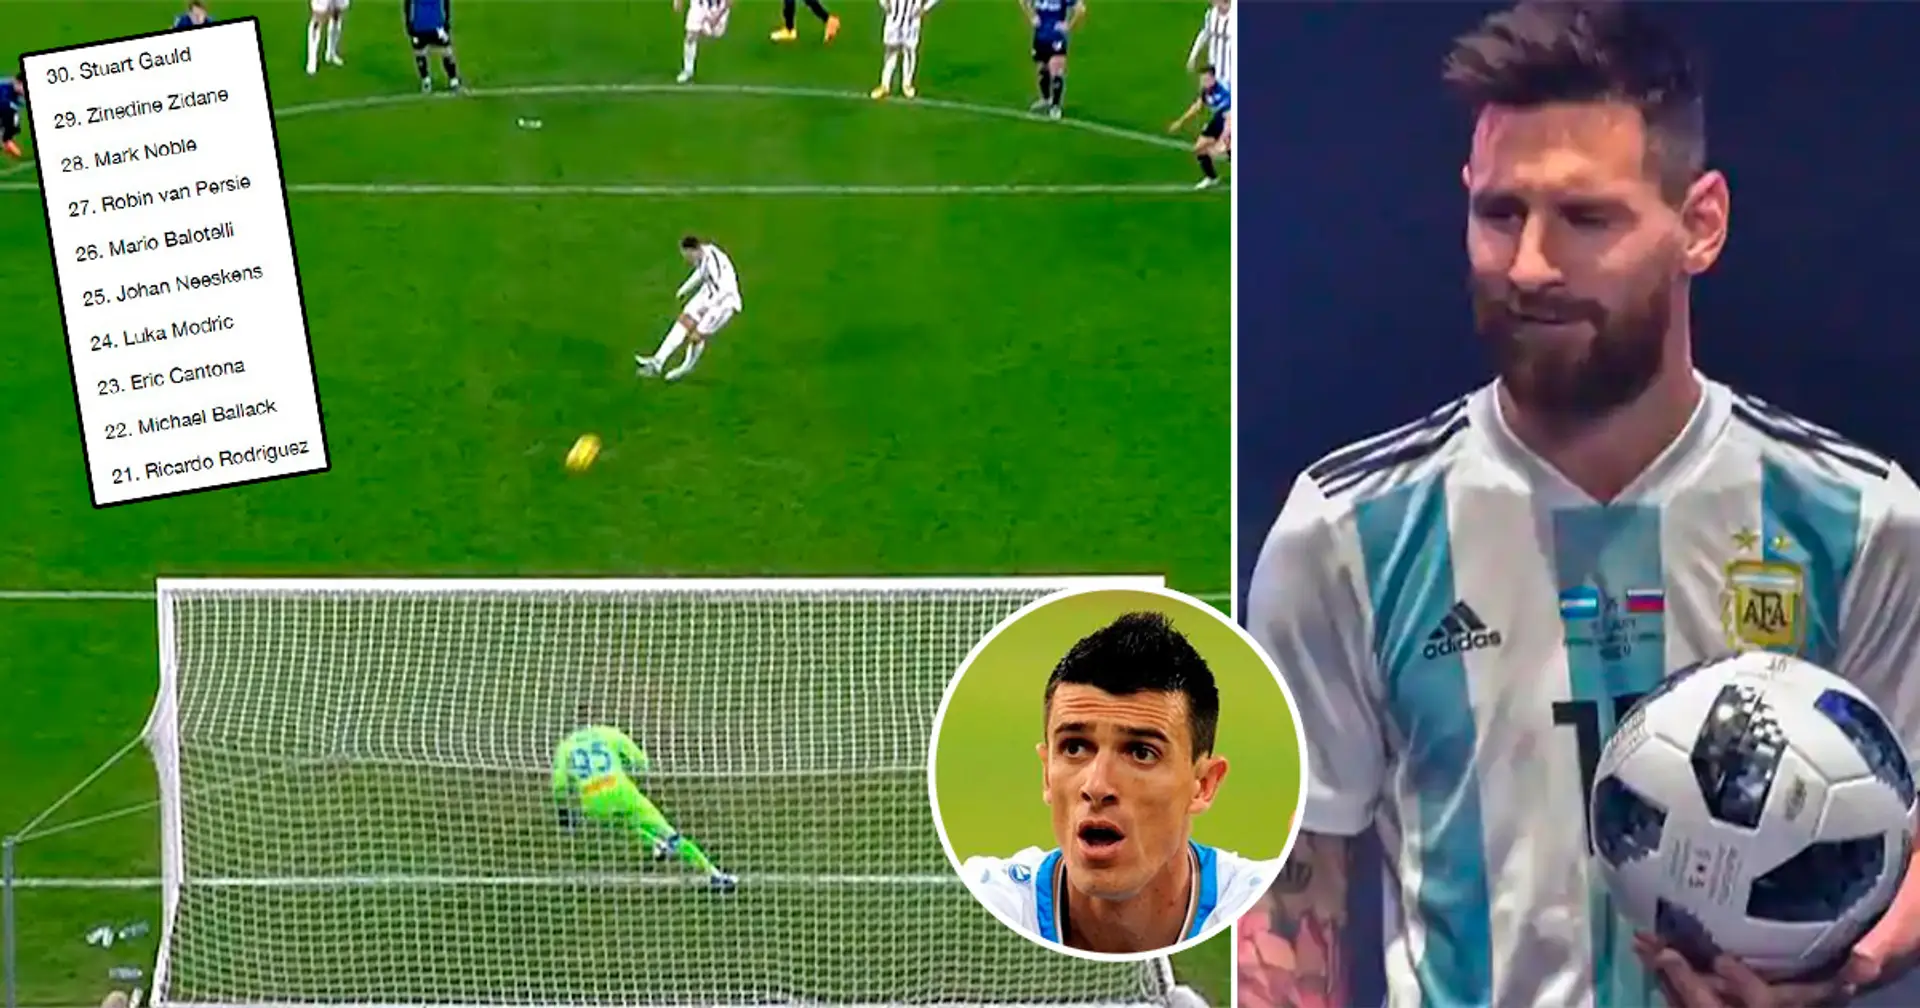 The best 50 penalty takers ever revealed - Messi and Cristiano not even in the top 20